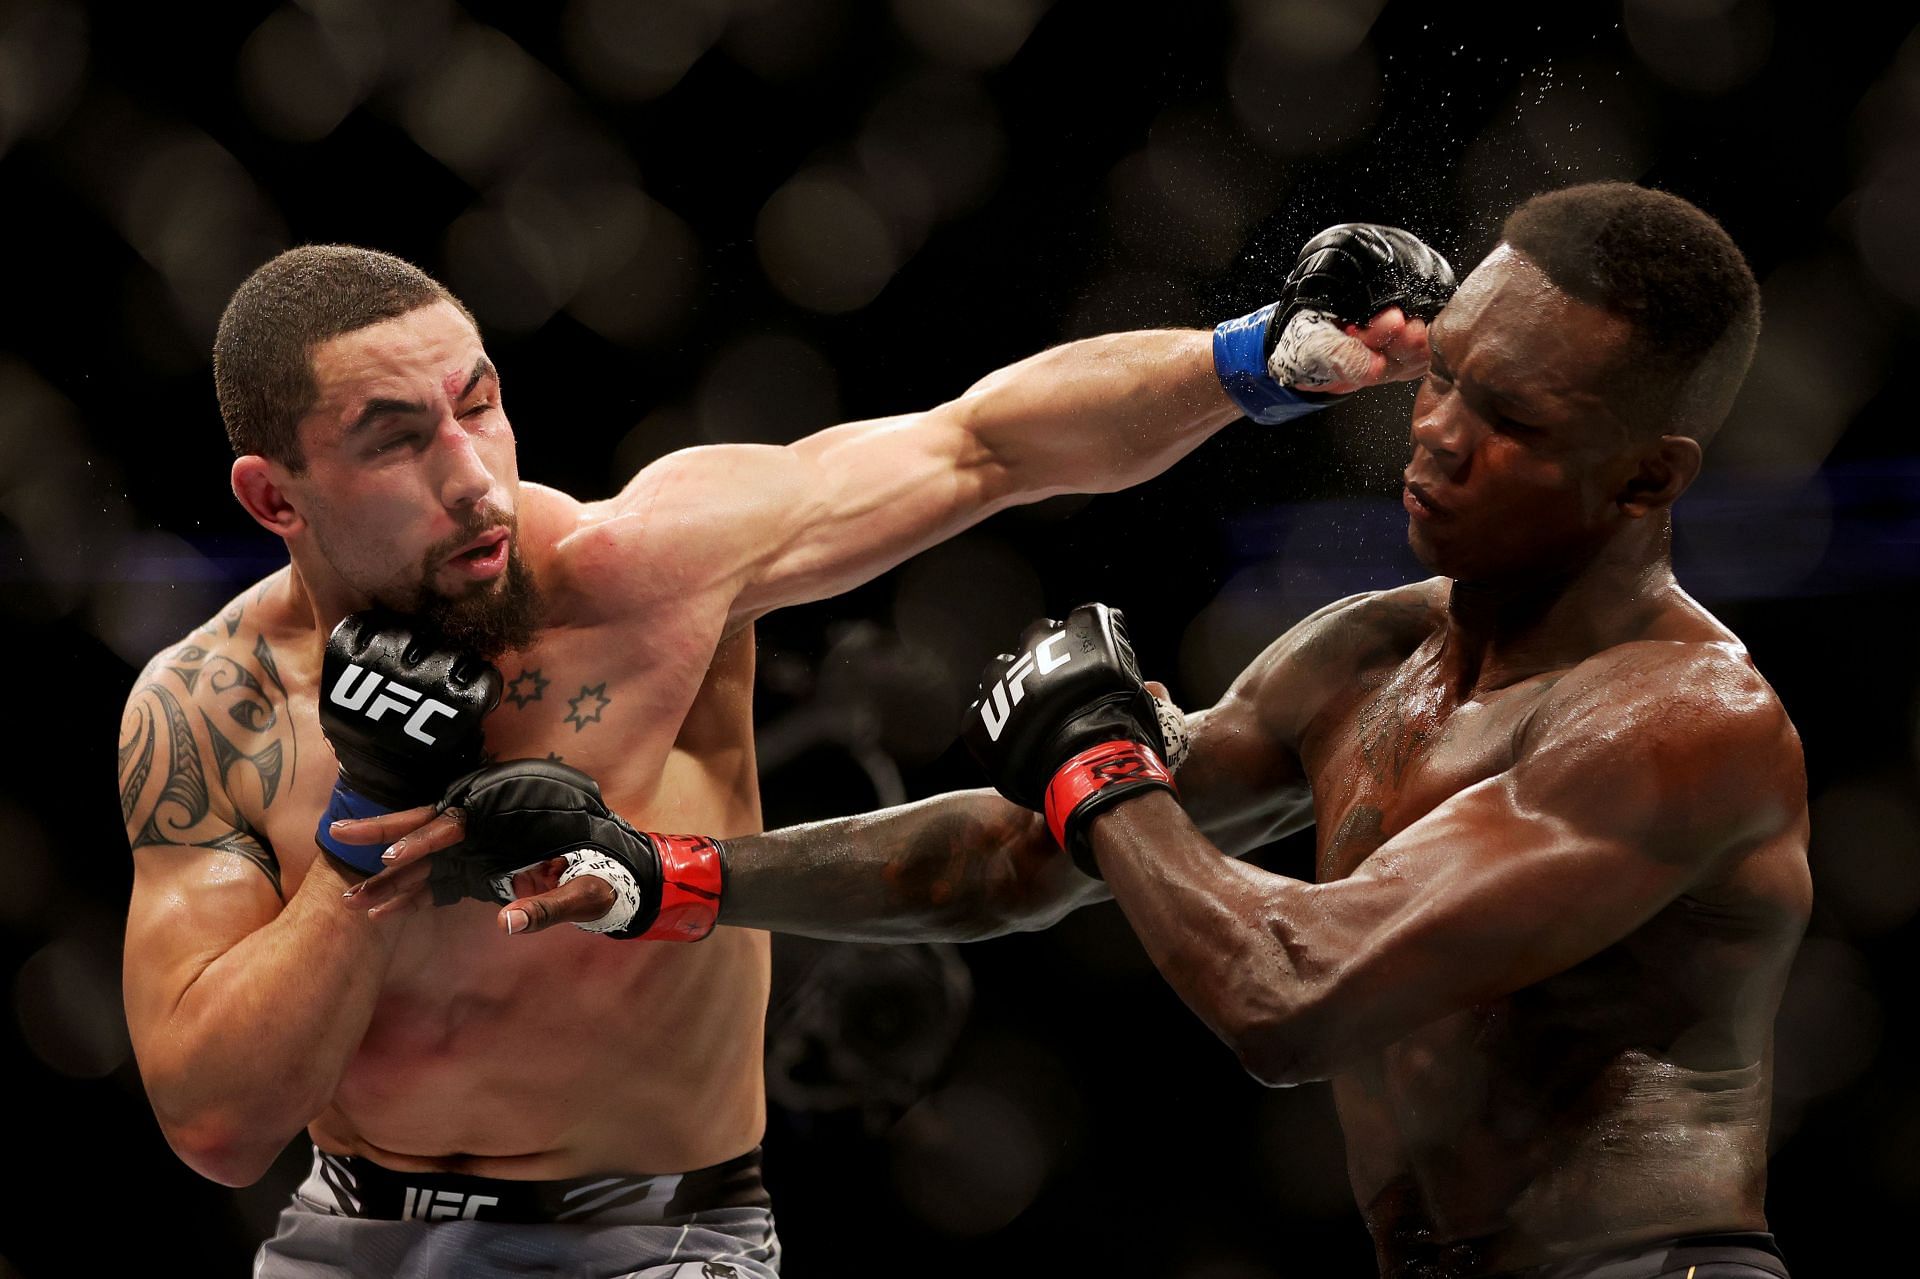 Robert Whittaker has proven himself as the second-best middleweight in the UFC